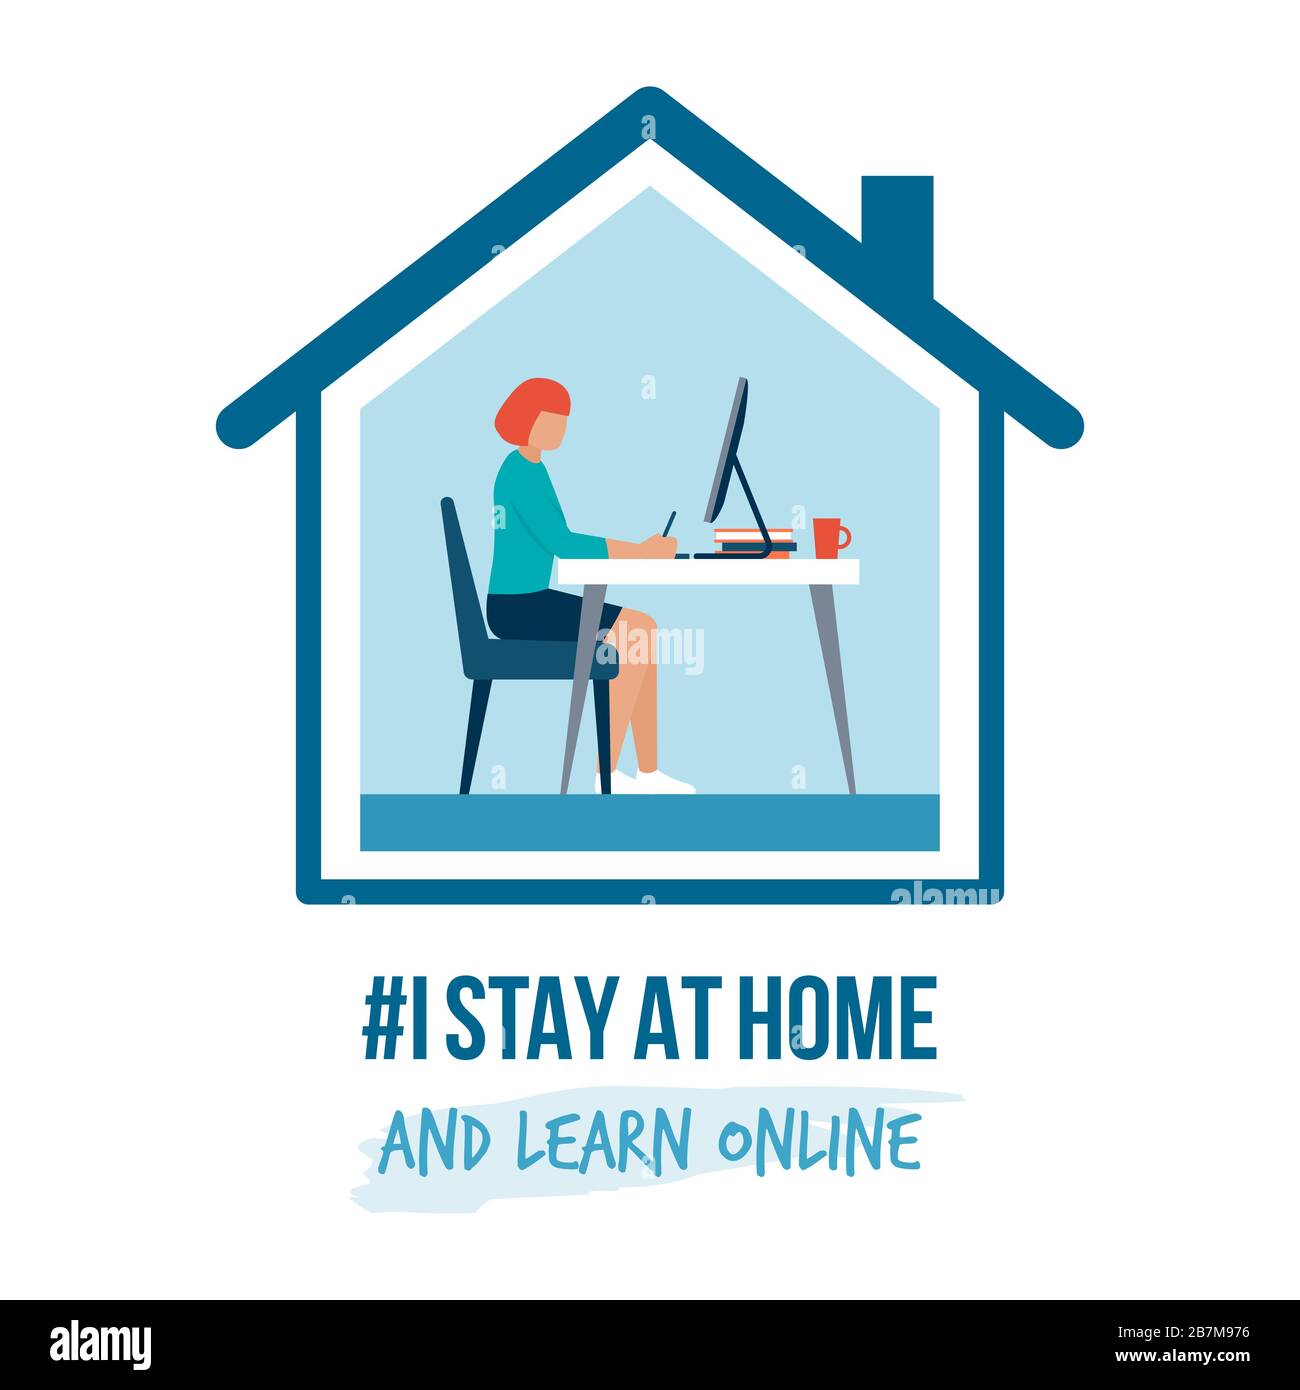 I stay at home awareness social media campaign and coronavirus prevention: woman working with her computer and learning online Stock Vector